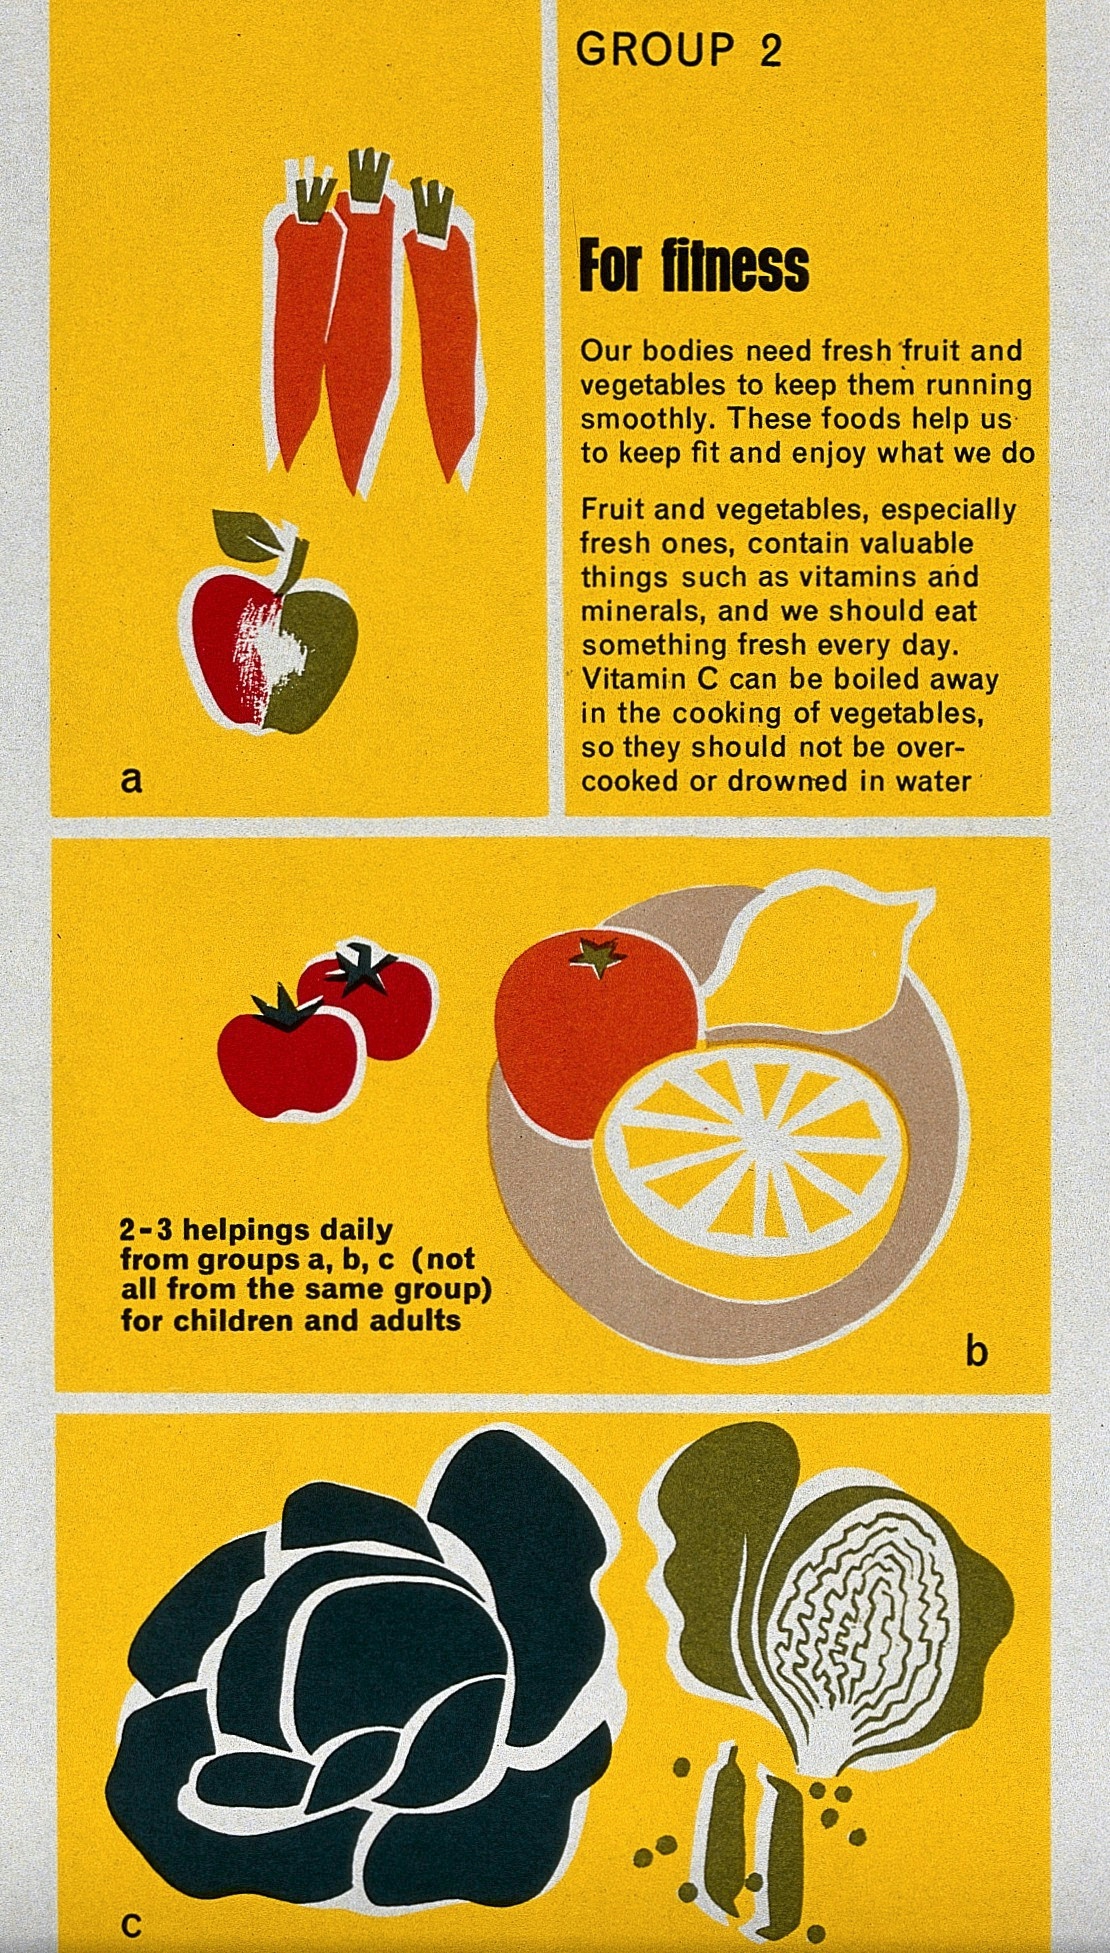 Brightly coloured leaflet promoting the eating of fruit and vegetables "for fitness" with a warning that these foods should not be "drowned in water".